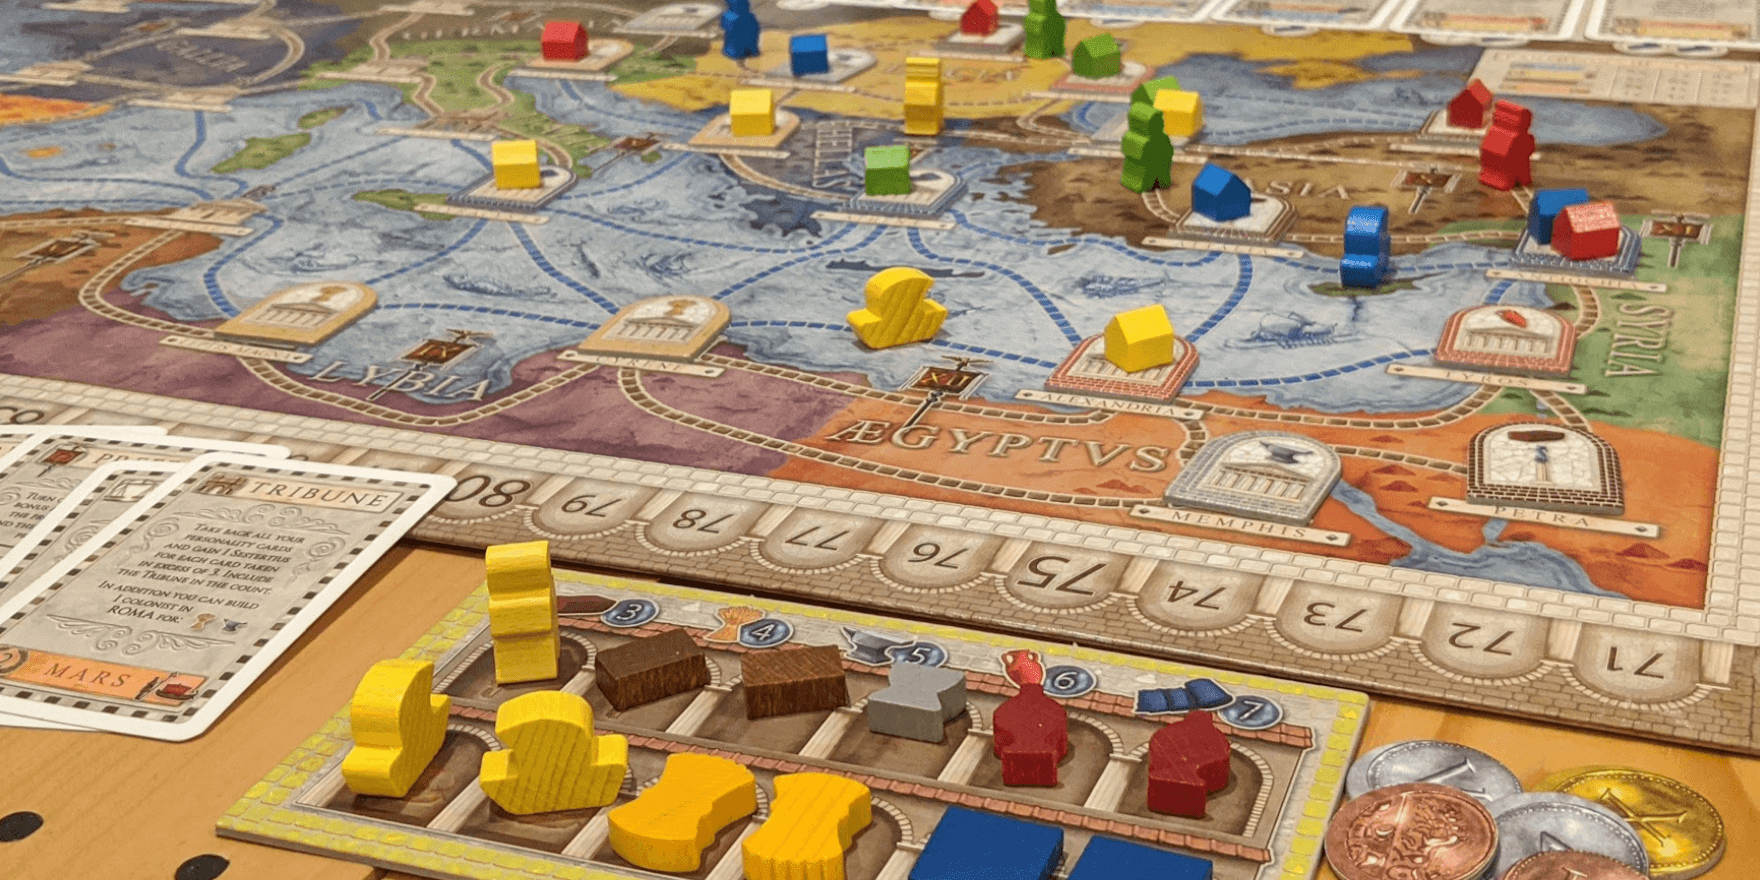 Concordia board game, view of the map